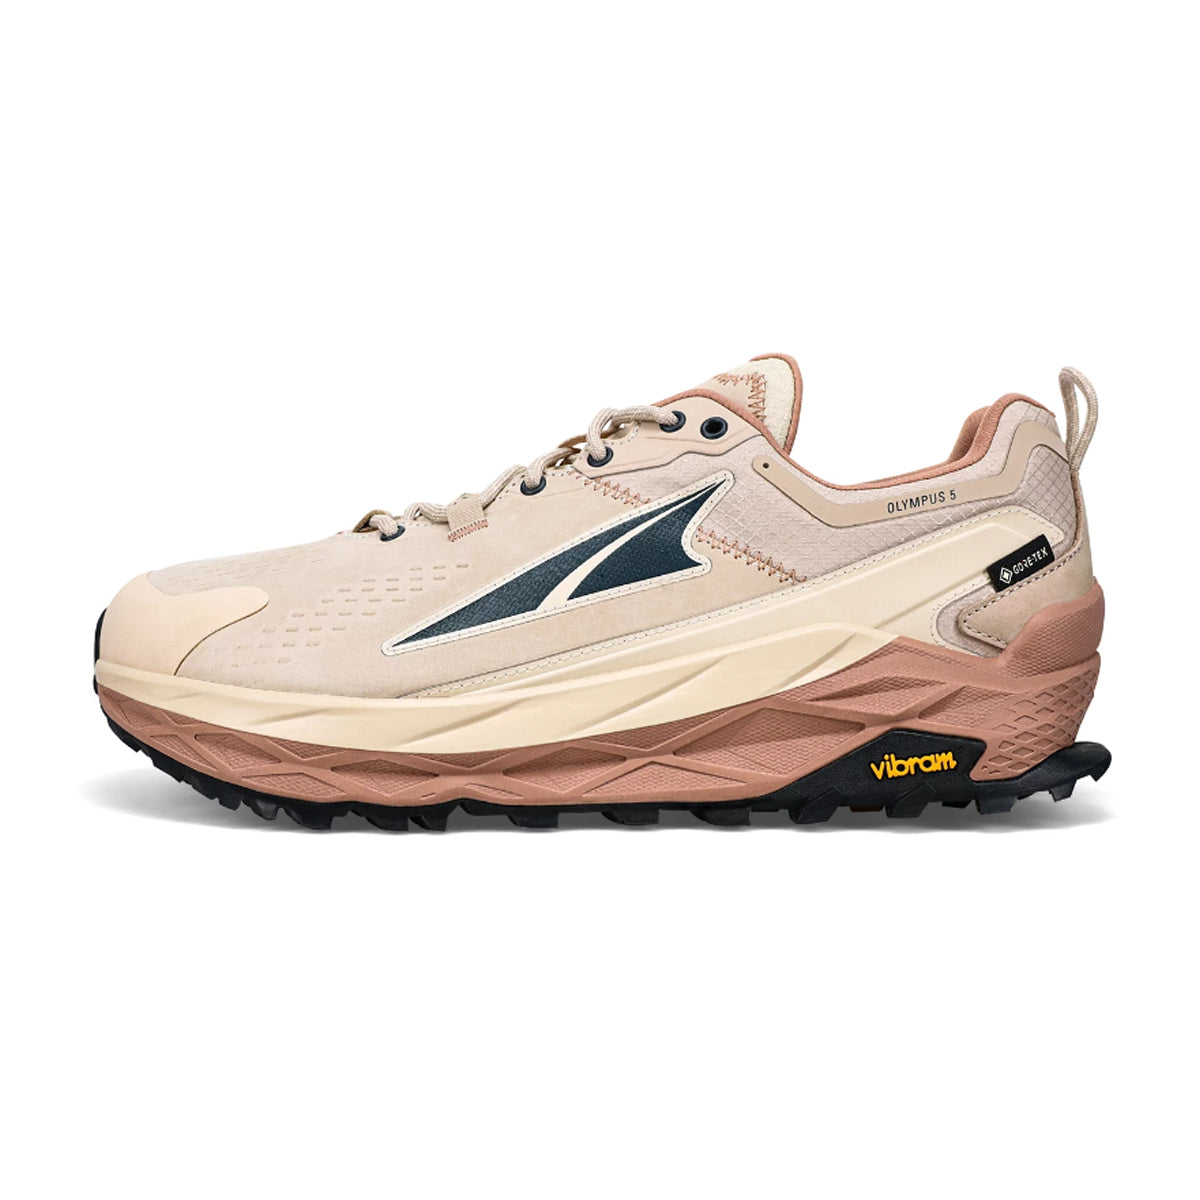 Shop for Altra Olympus 5 Hike Low GTX | GOHUNT